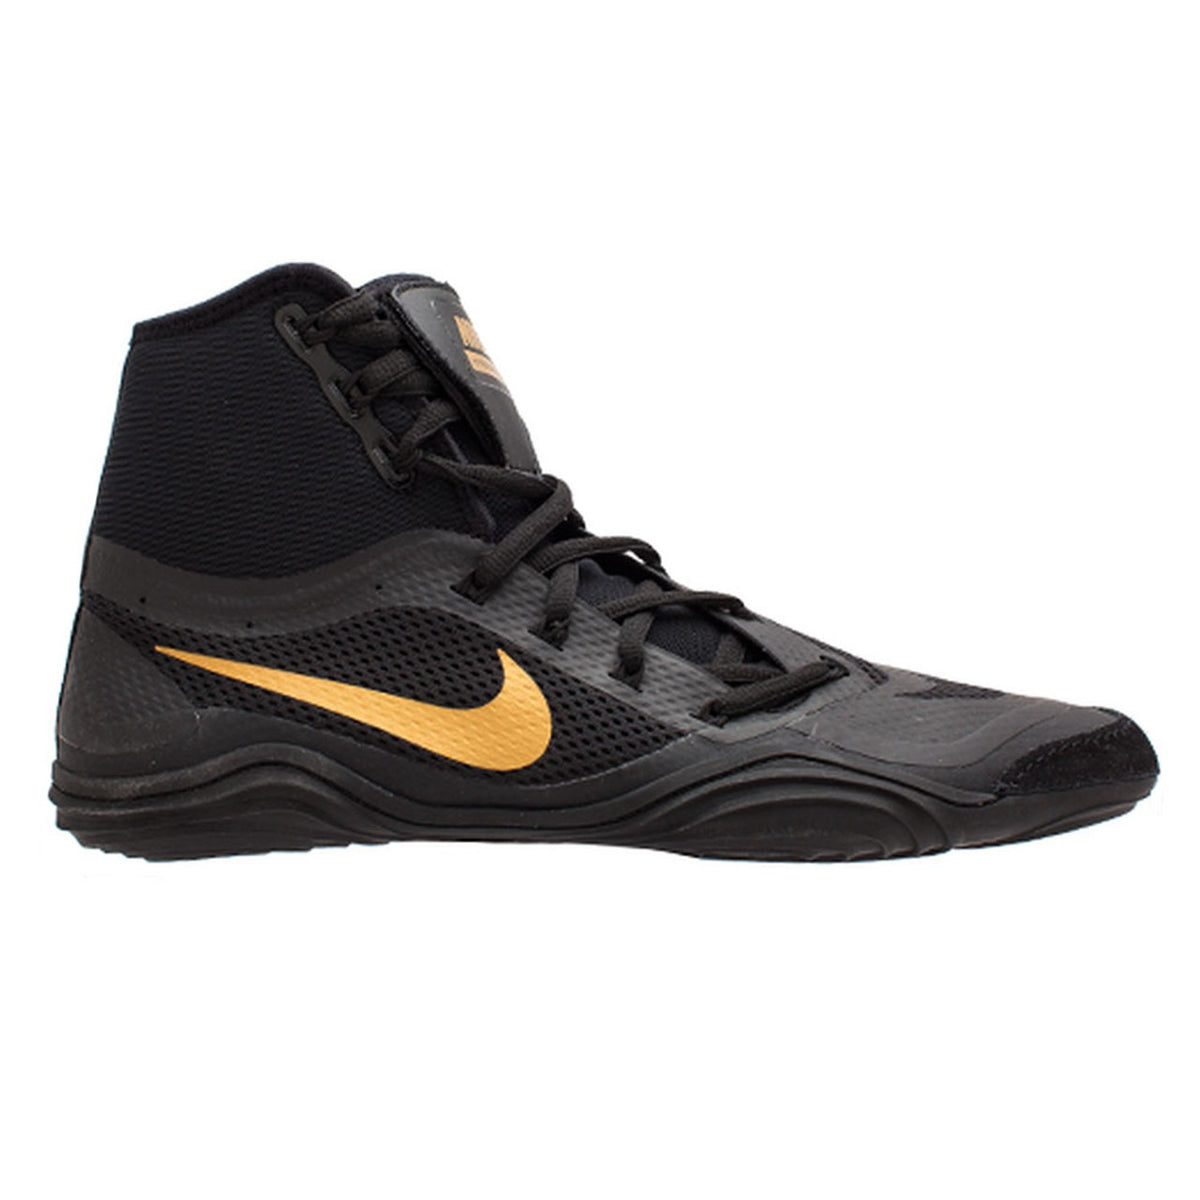 Nike wrestling shoes HYPERSWEEP LE. The professional wrestling shoe for all ambitious wrestlers. With the most advanced technology, the Nike Hypersweep gives you plenty of grip on the wrestling mat. In training and competition. Here in the color black/gold.